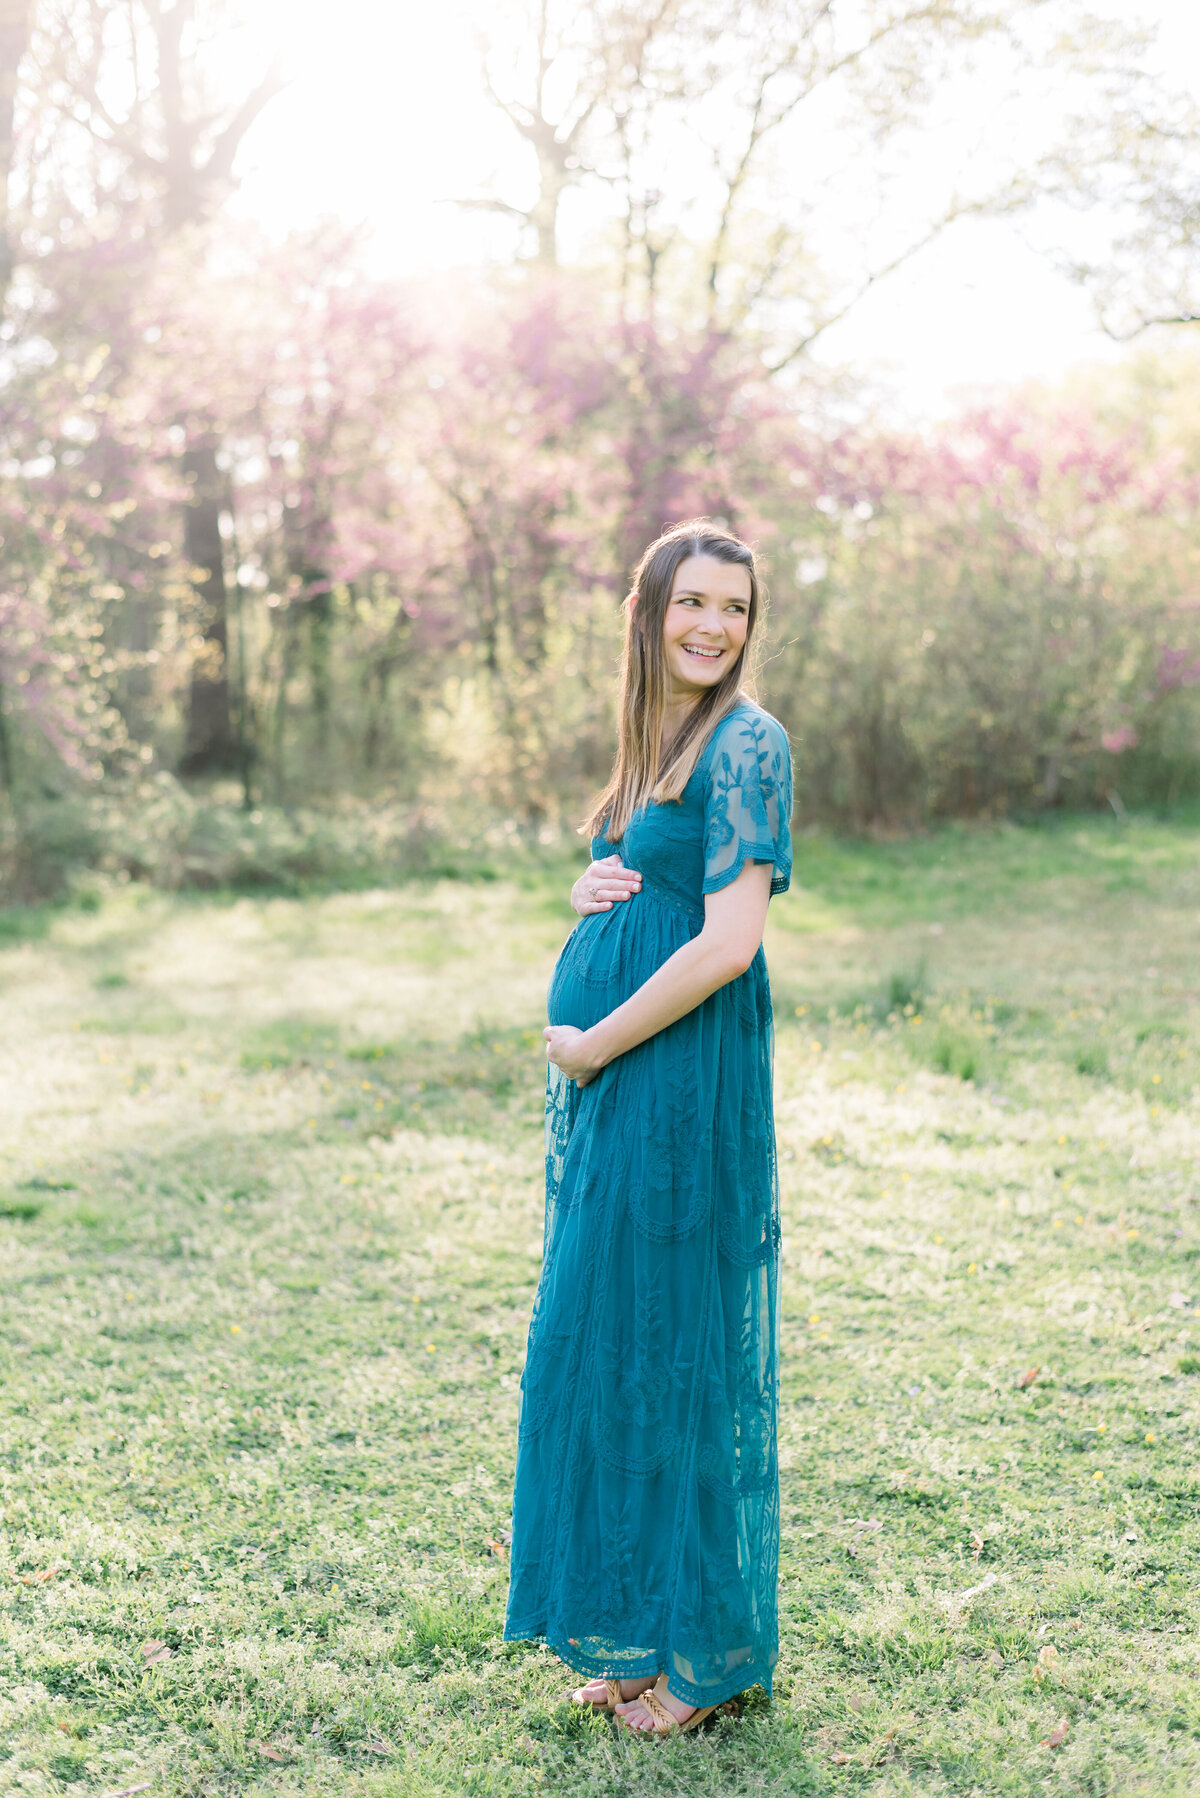 Foote_maternity110421_022